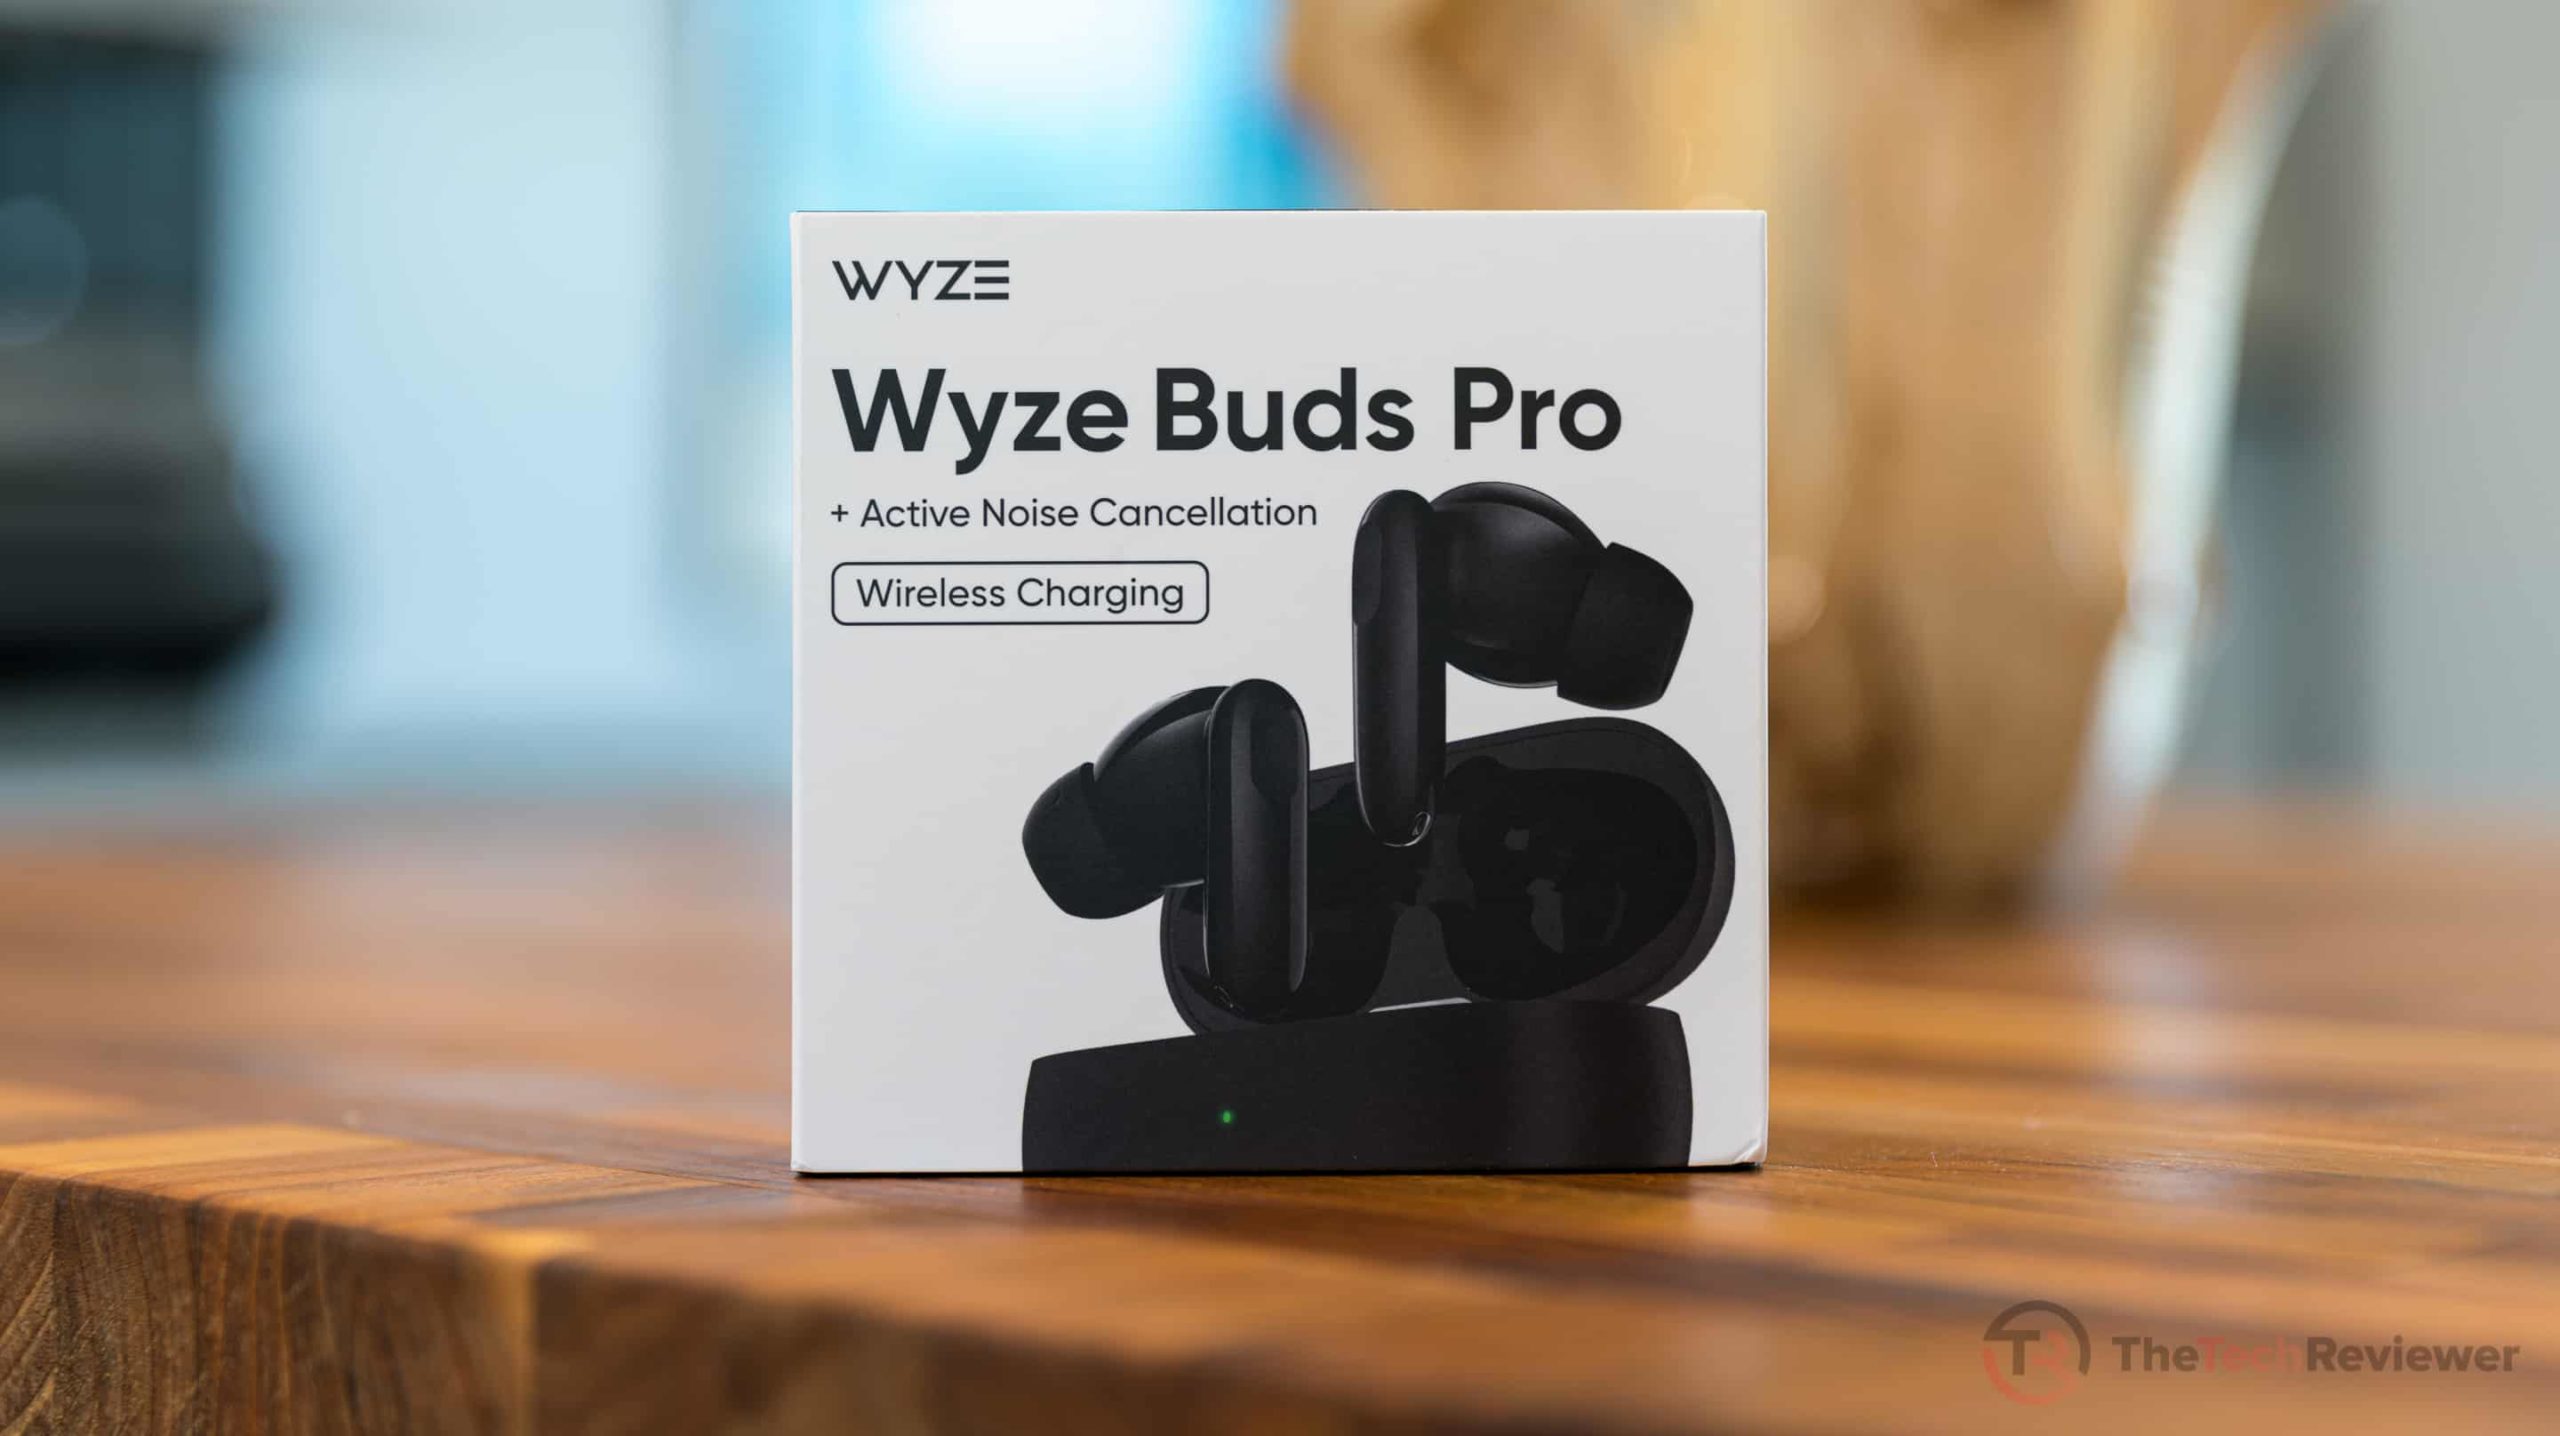 https://thetechreviewer.com/wp-content/uploads/2021/08/Wyze-Buds-Pro-3505-scaled.jpg